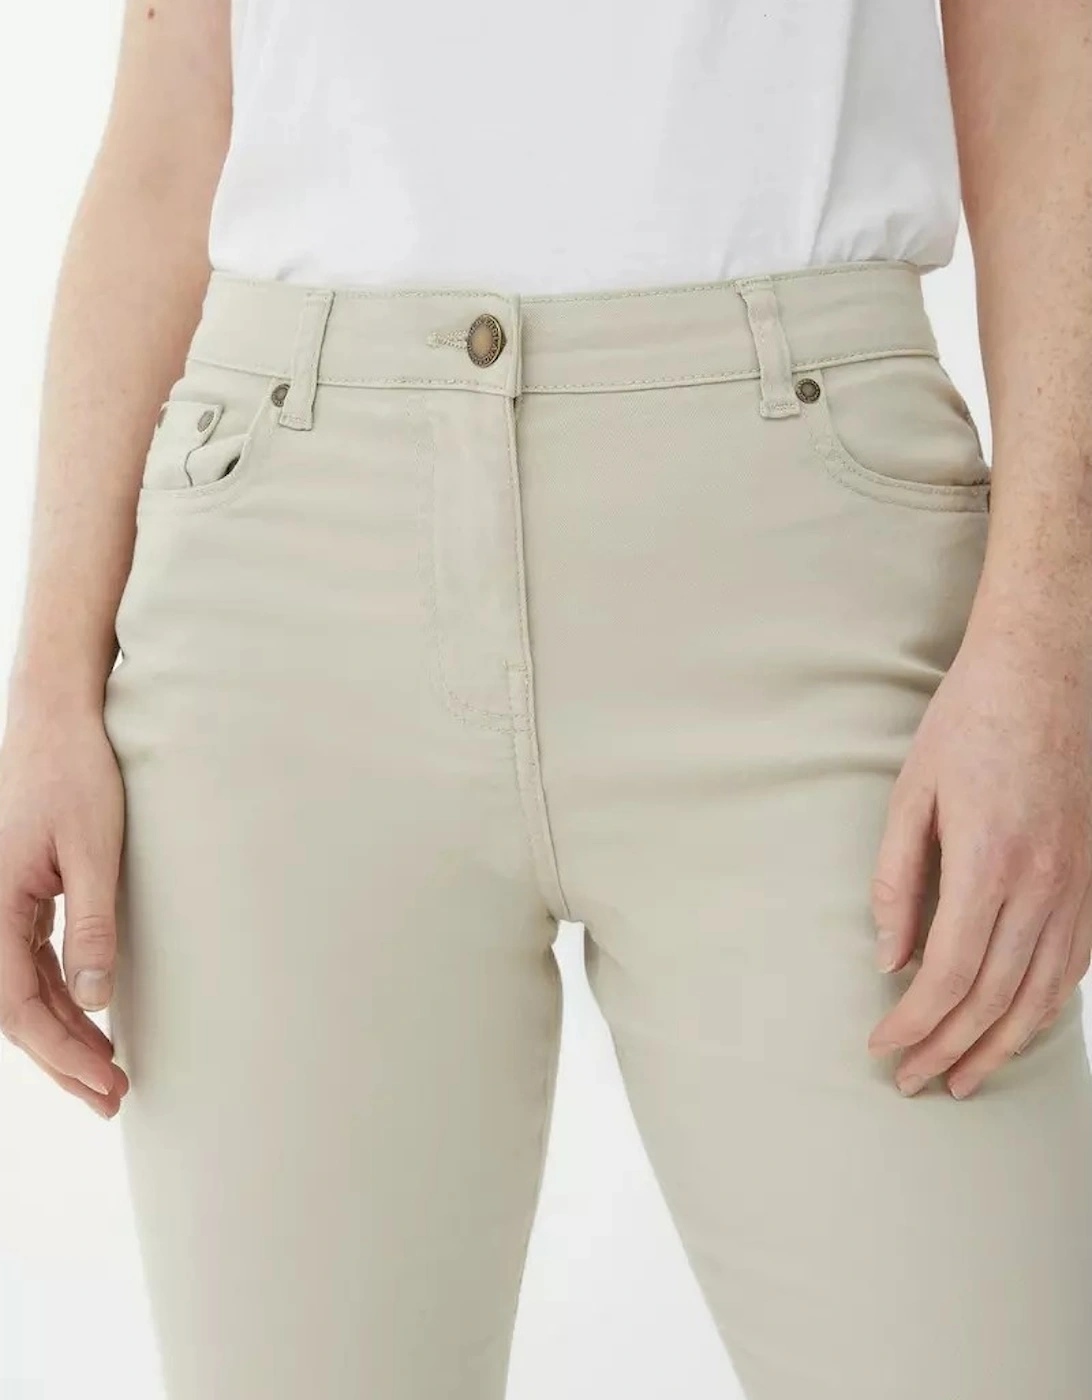 Womens/Ladies Stretch Trousers